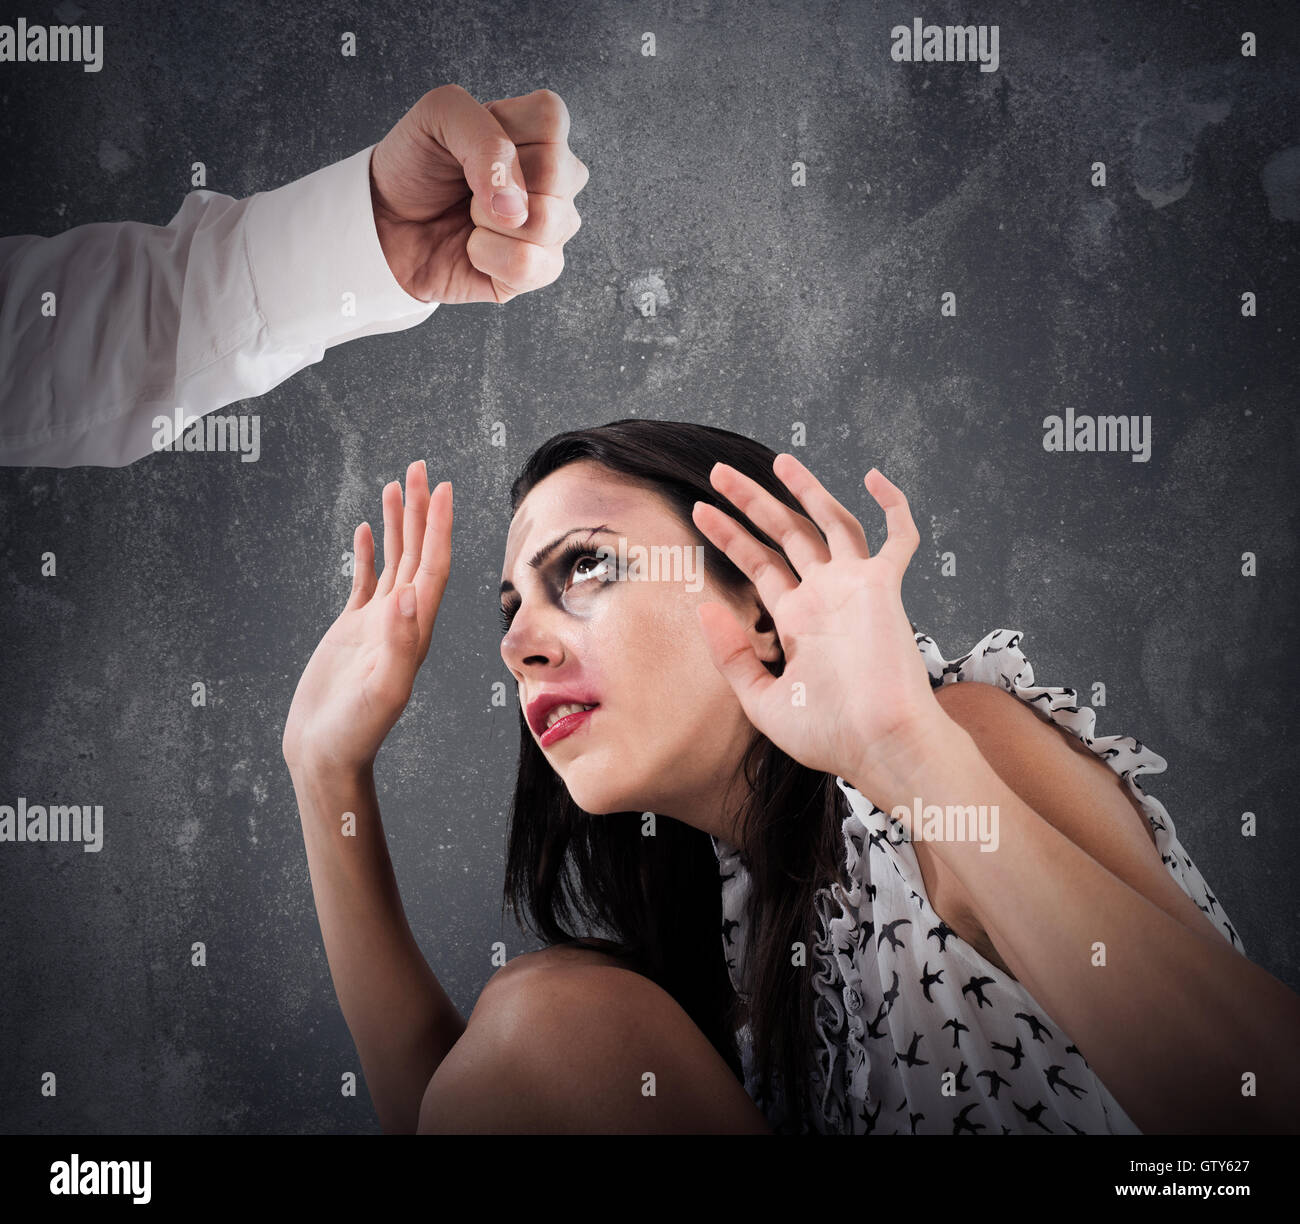 Violence against women Stock Photo